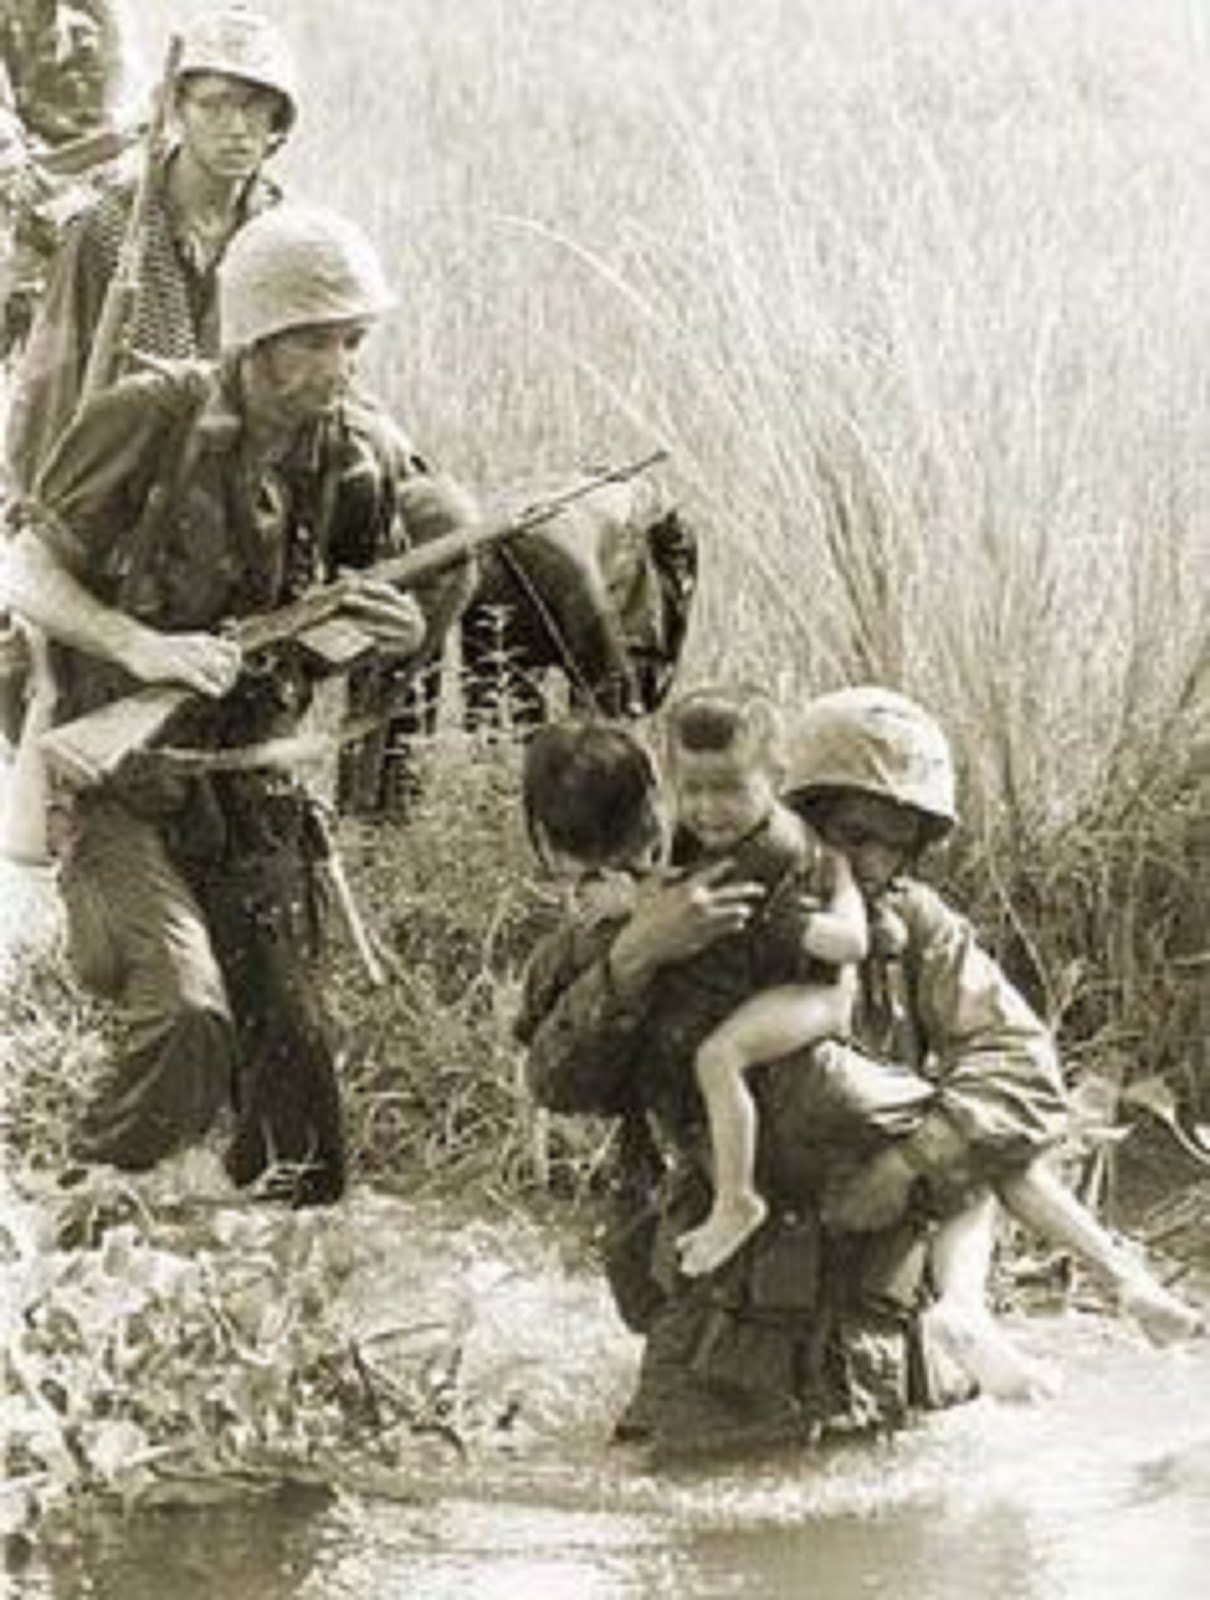 THE TRUE CONDUCT OF THE VIETNAM VETERAN WITH THE VIETNAMESE WOMEN CHILDREN AND THEIR POW*MIA;s